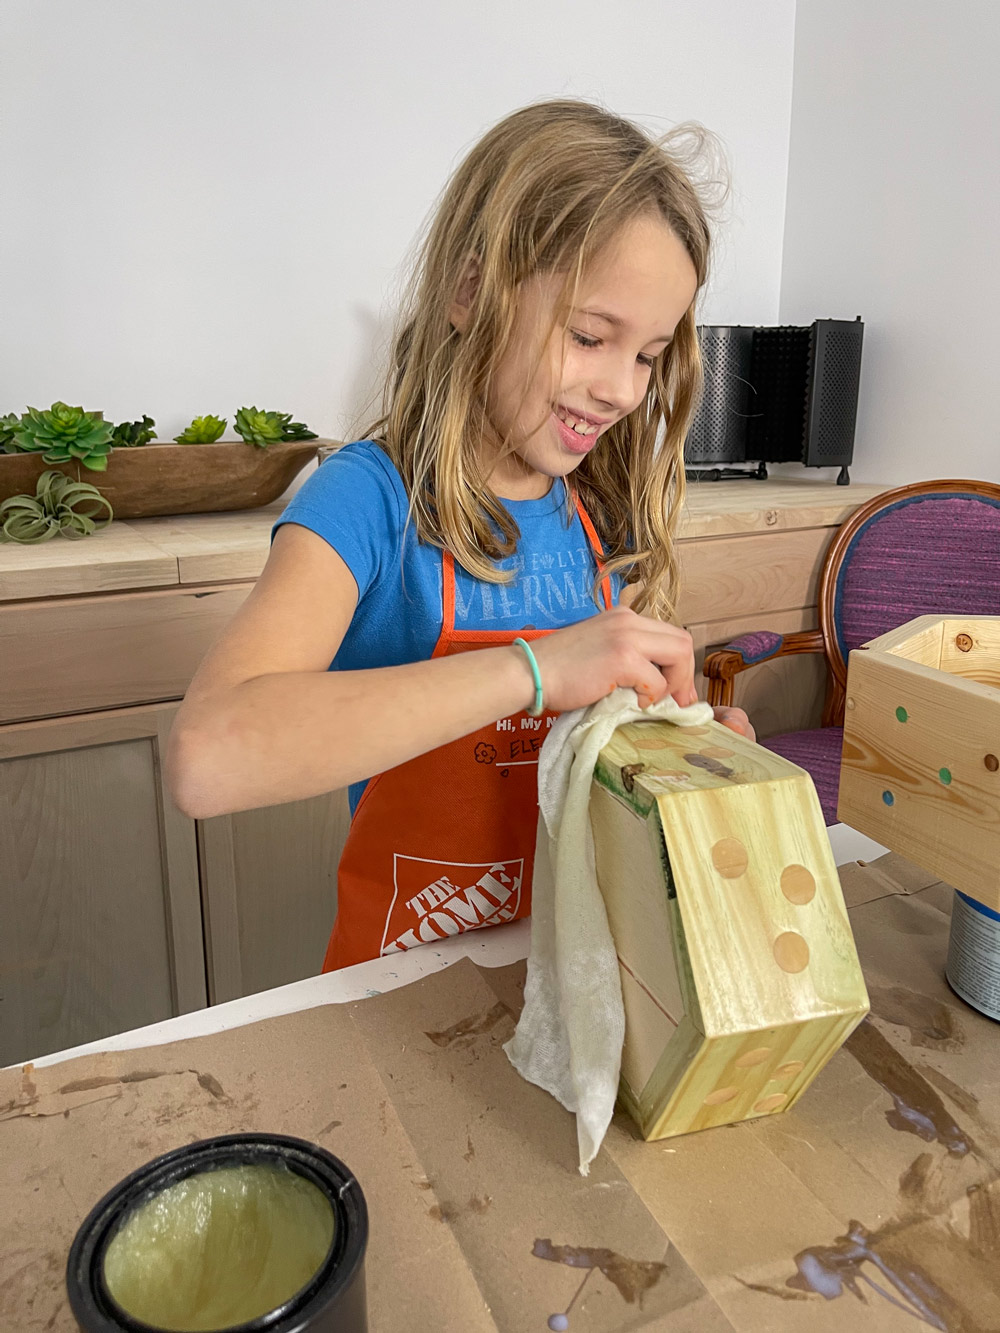 A young girl applying furniture wax to an unfinished hexagonal planter.